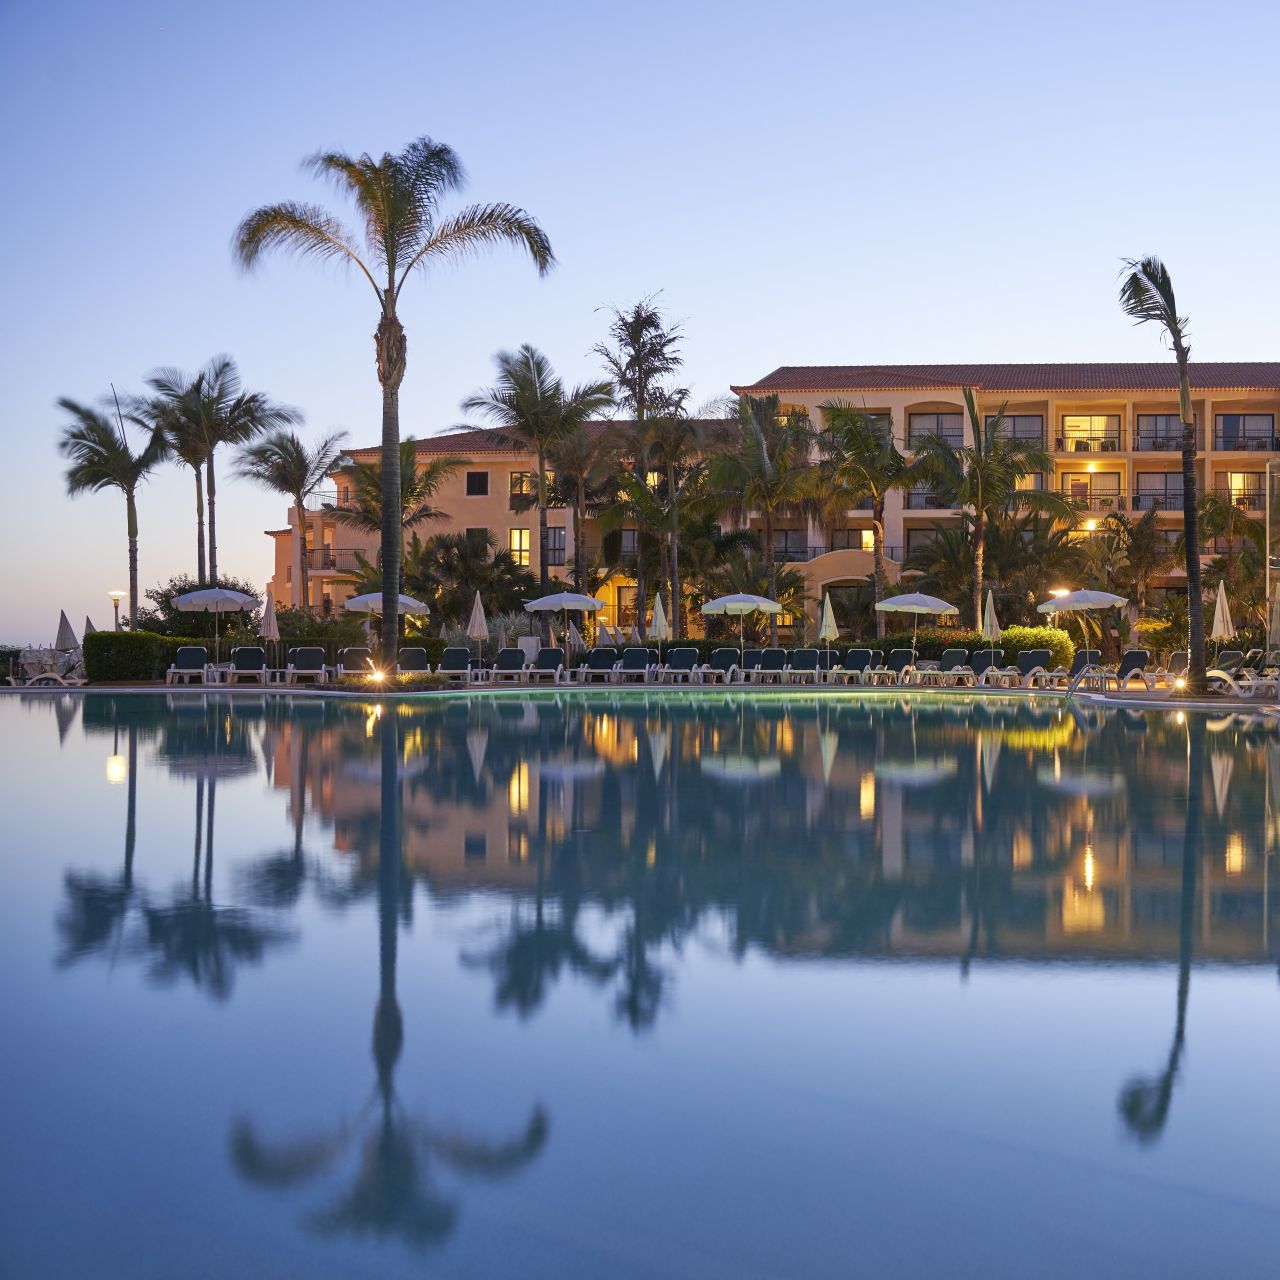 Hotel Porto Mare - Funchal - Great prices at HOTEL INFO